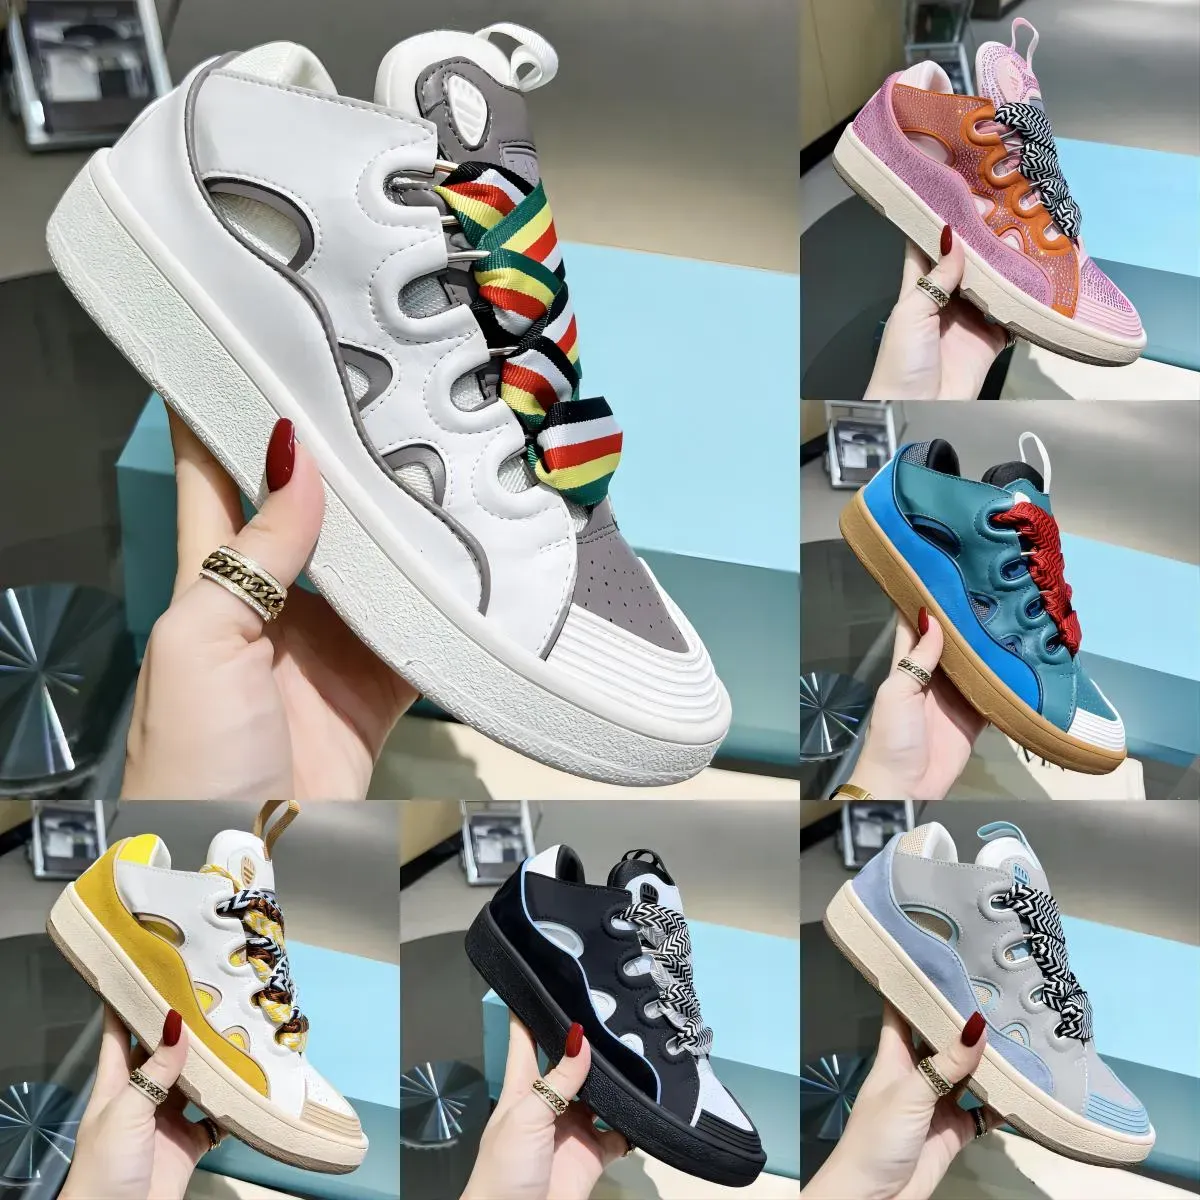 Top-quality Calfskin High Class Canvas Frosted Leather Patchwork Bread Dizzy Thick Soled Fashion Skate Shoe Couples Men Women Shoes Sizes 35-45